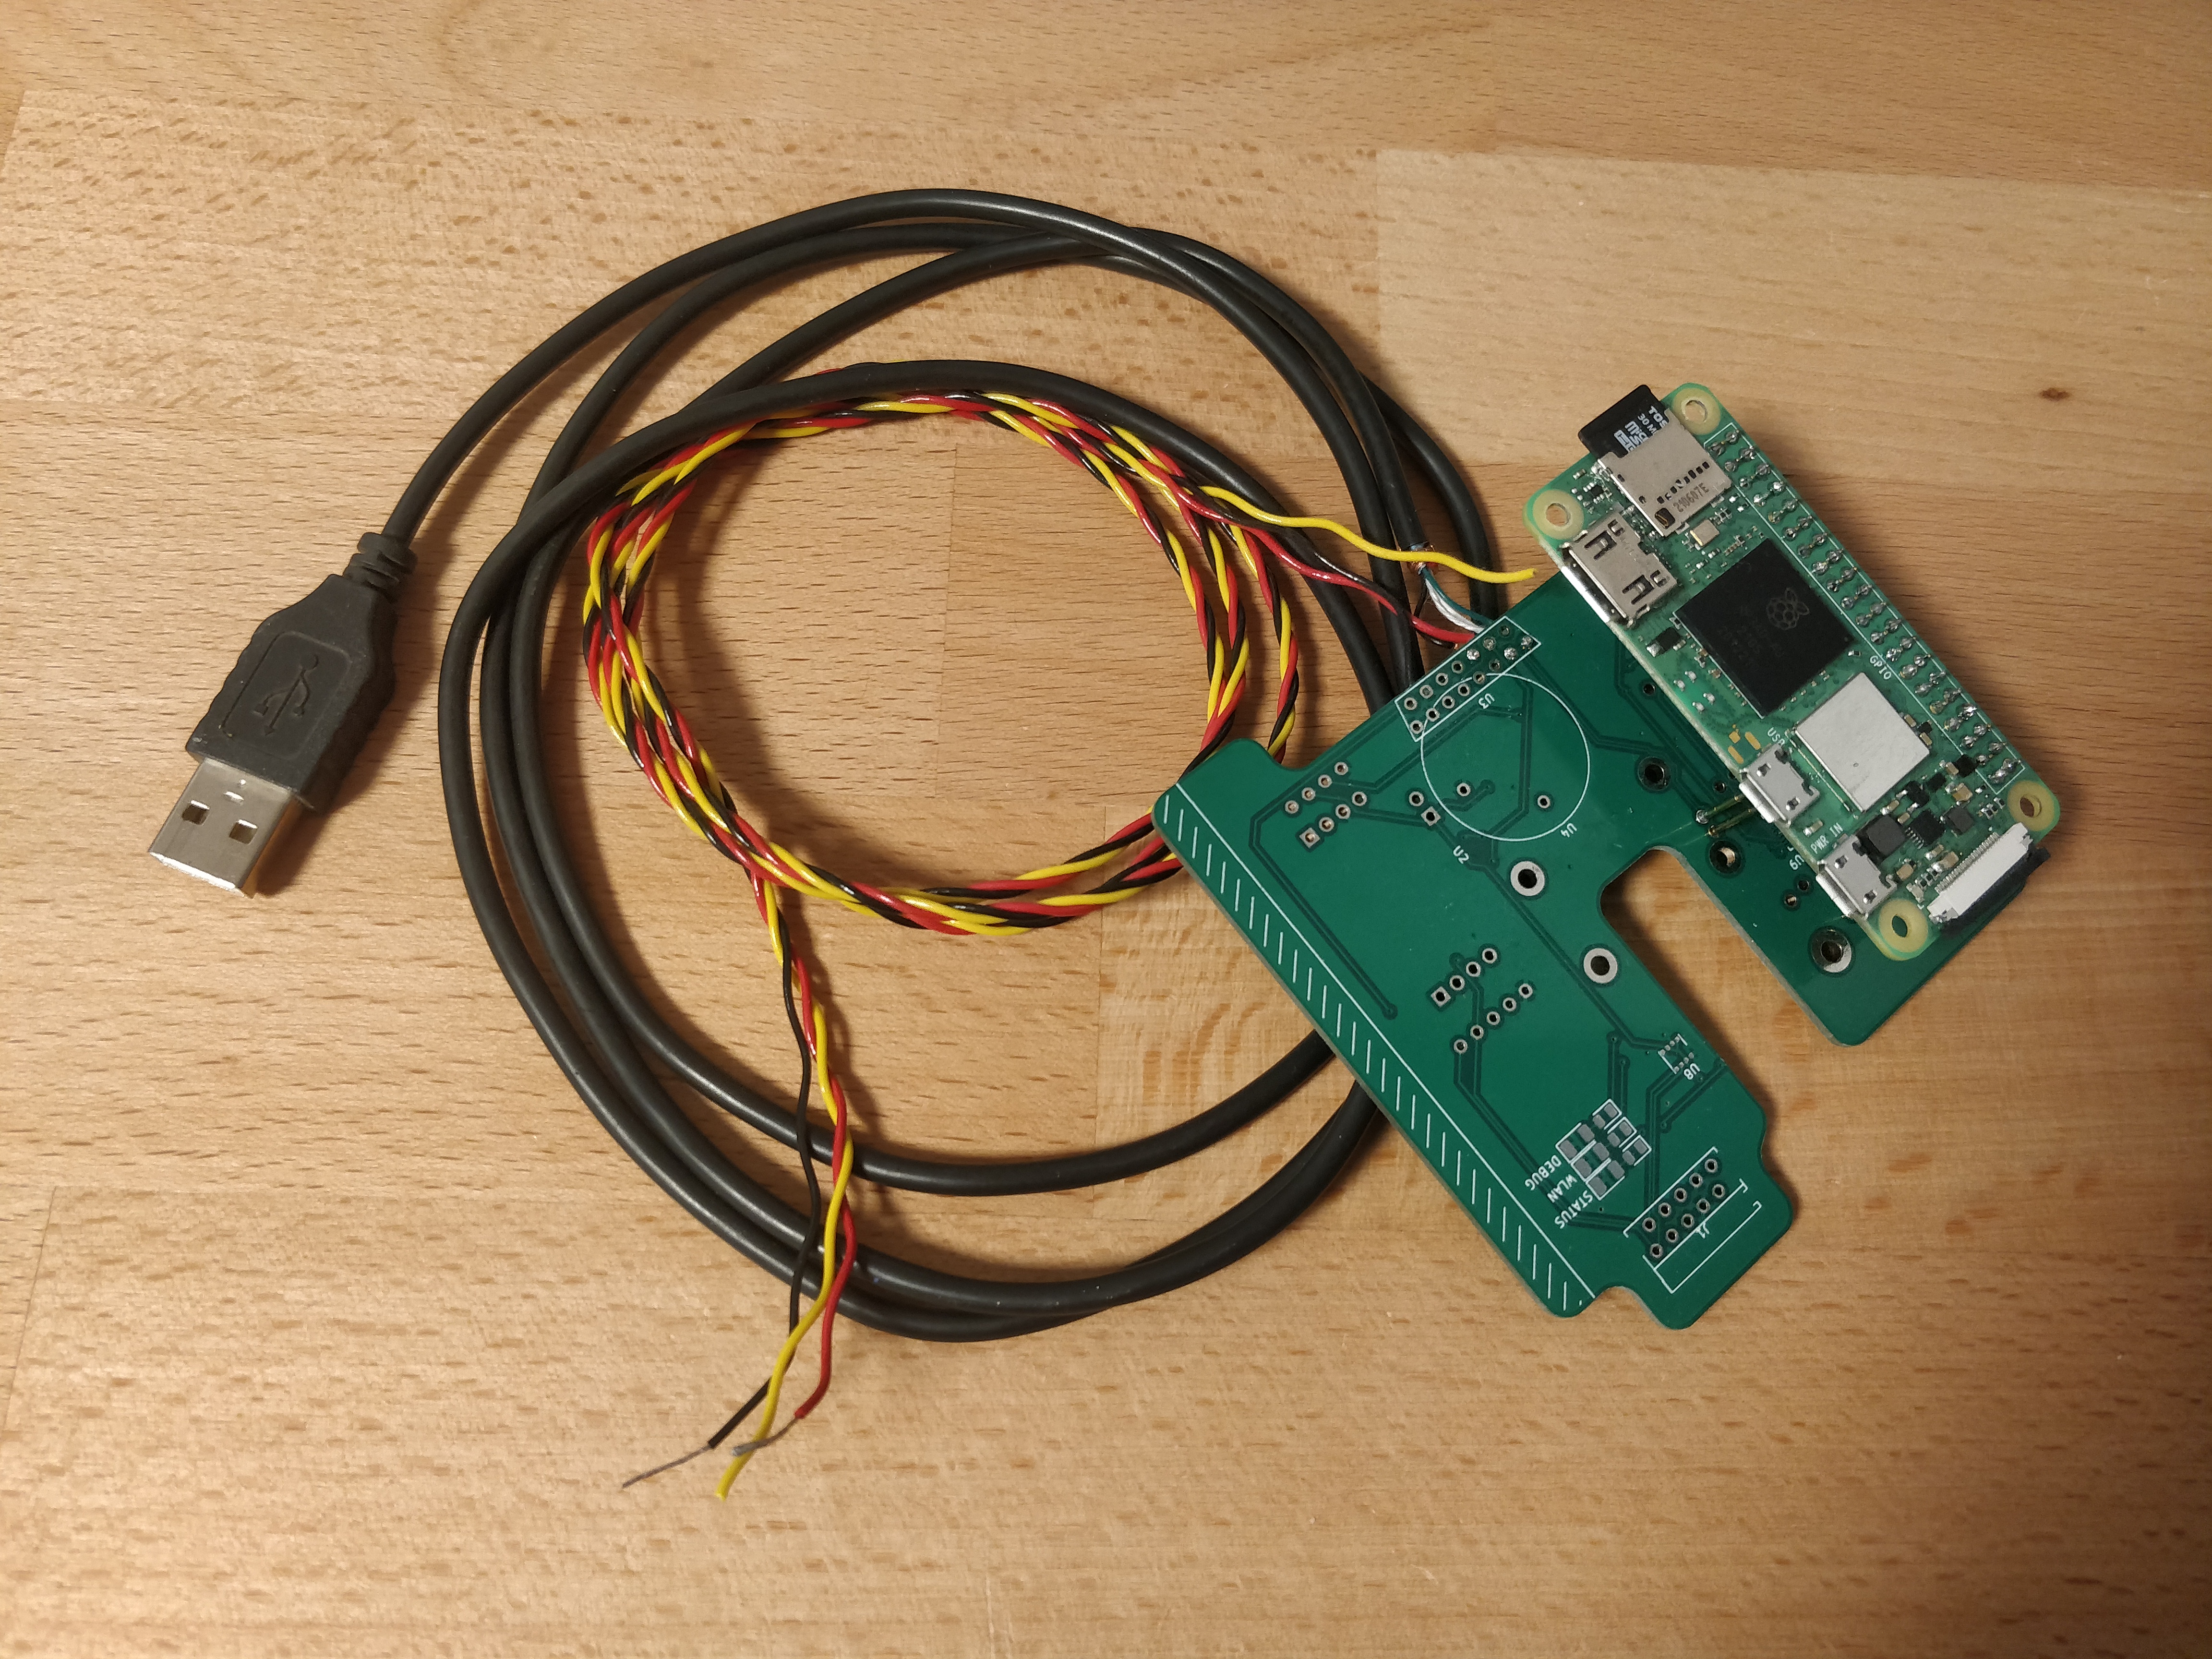 Mainboard Prototype with Raspberry Pi Zero 2W, power, and USB cable